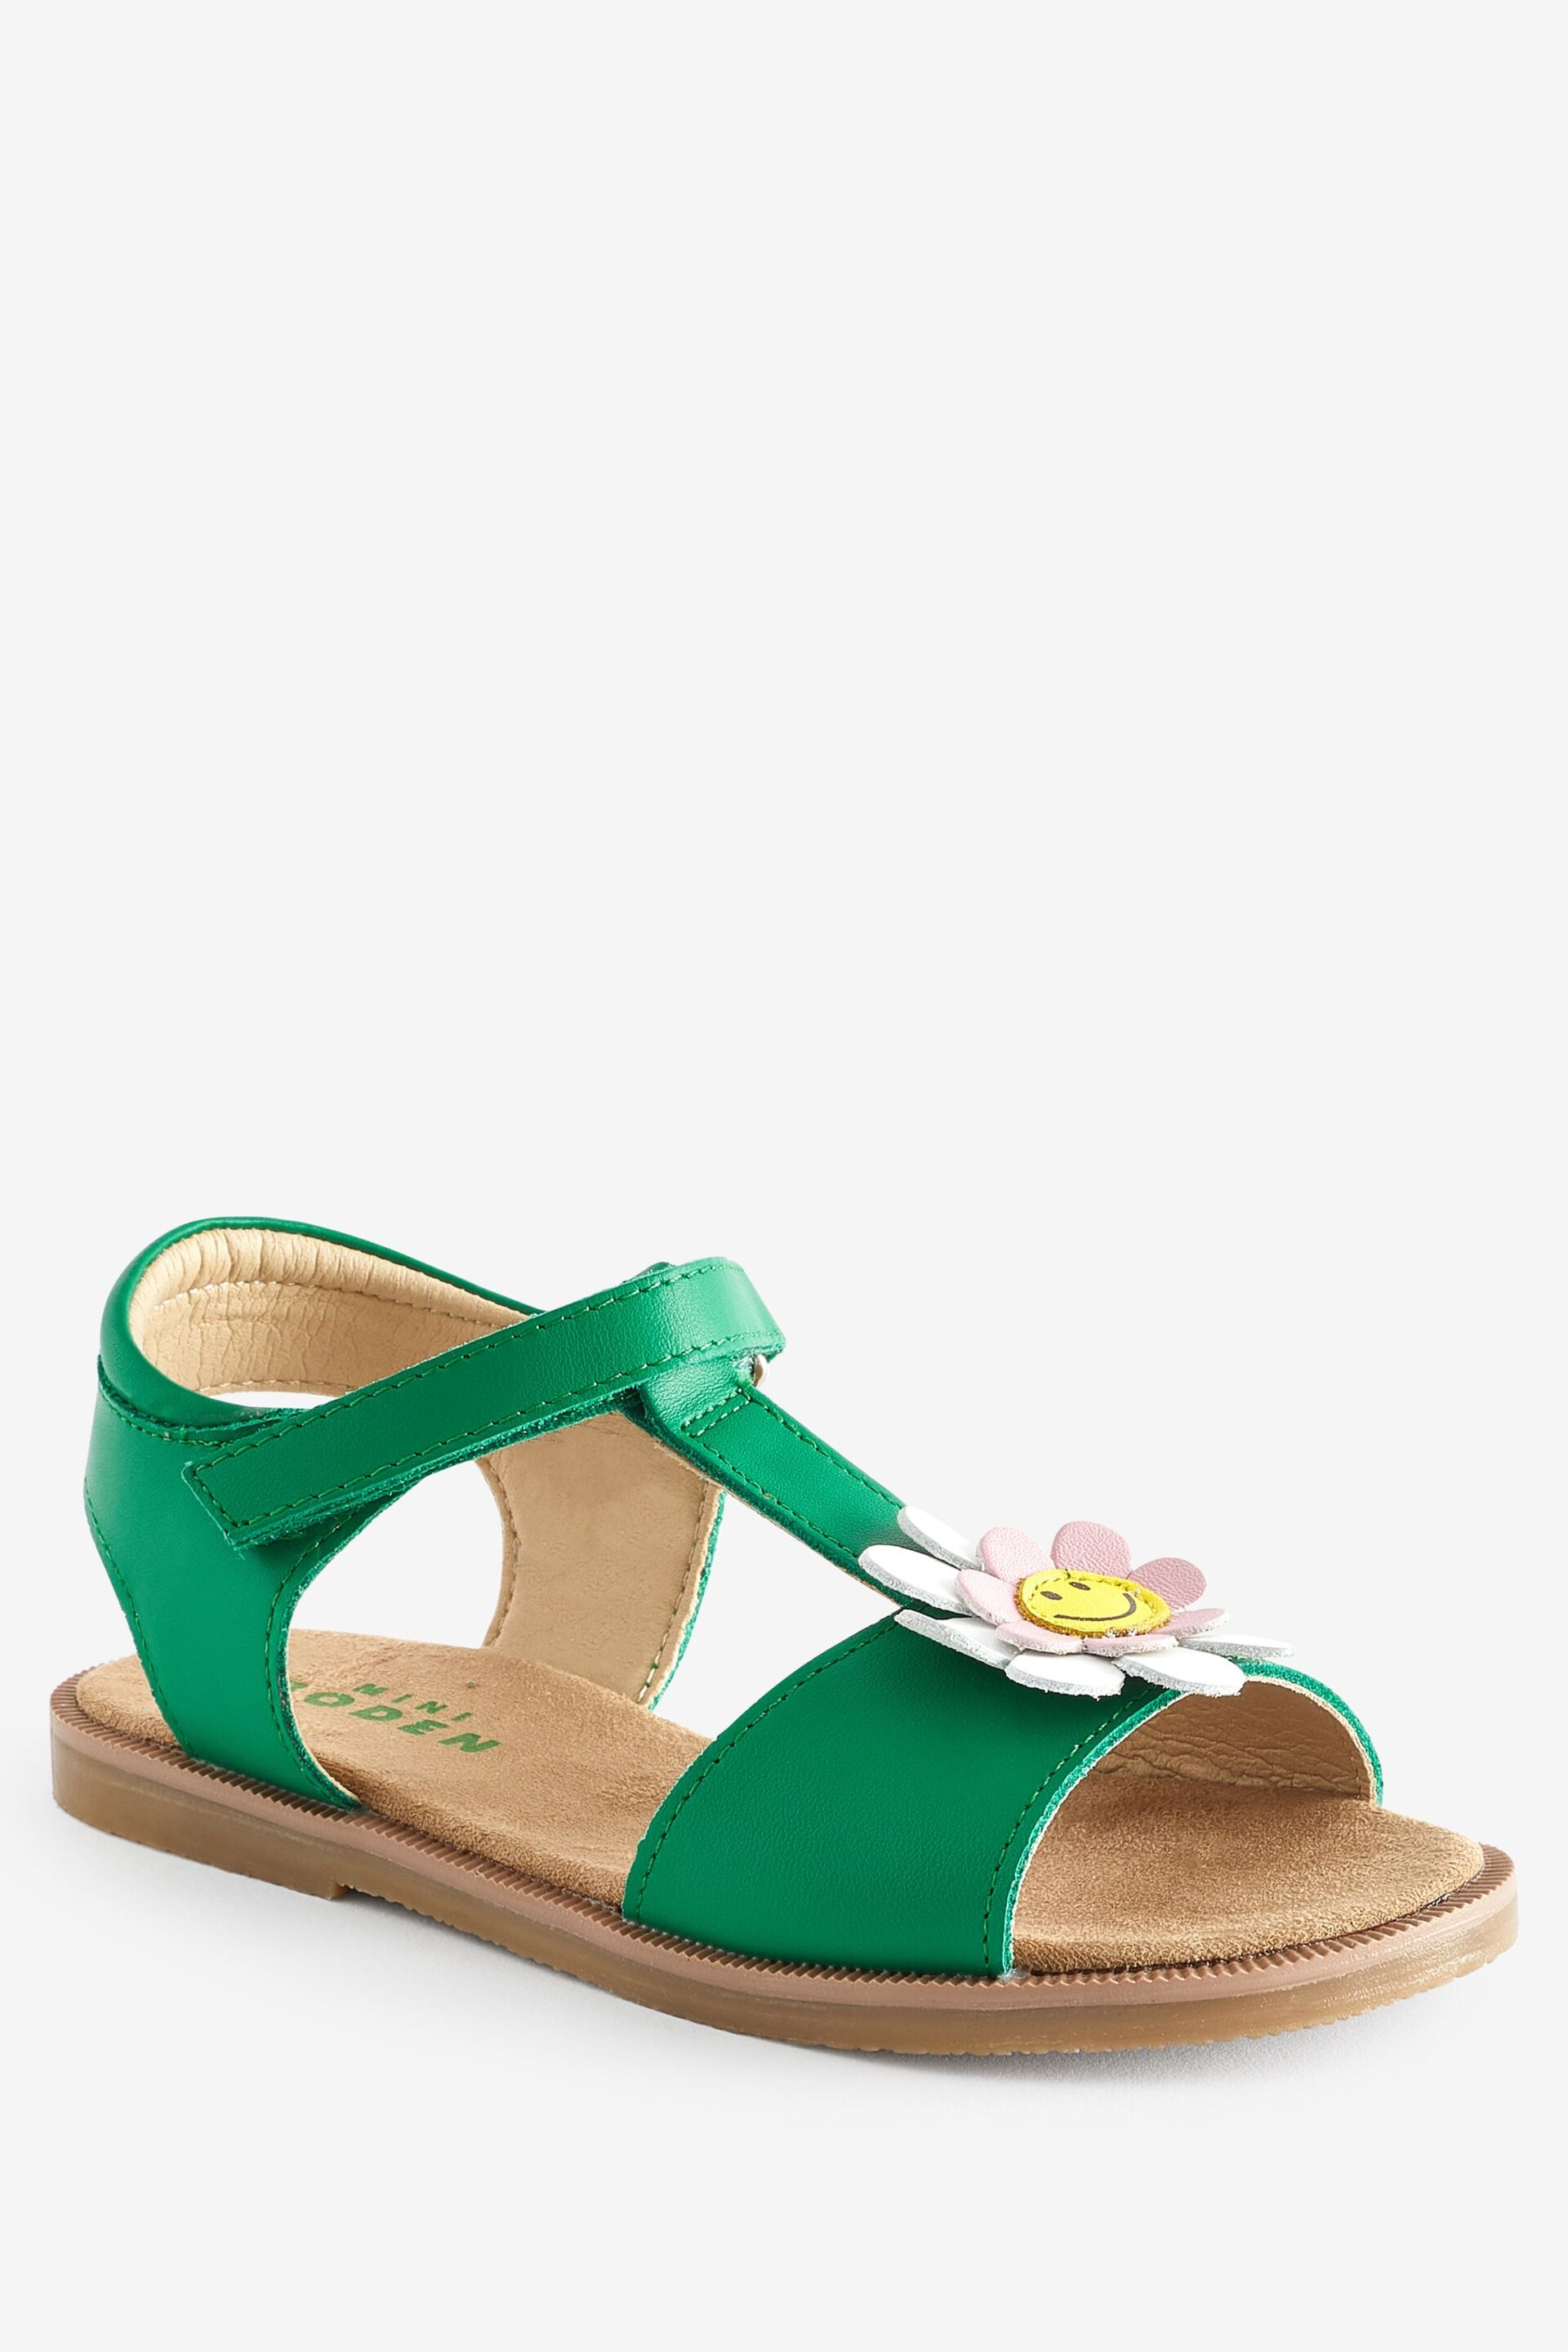 Boden Green Fun Leather Sandals - Image 3 of 4